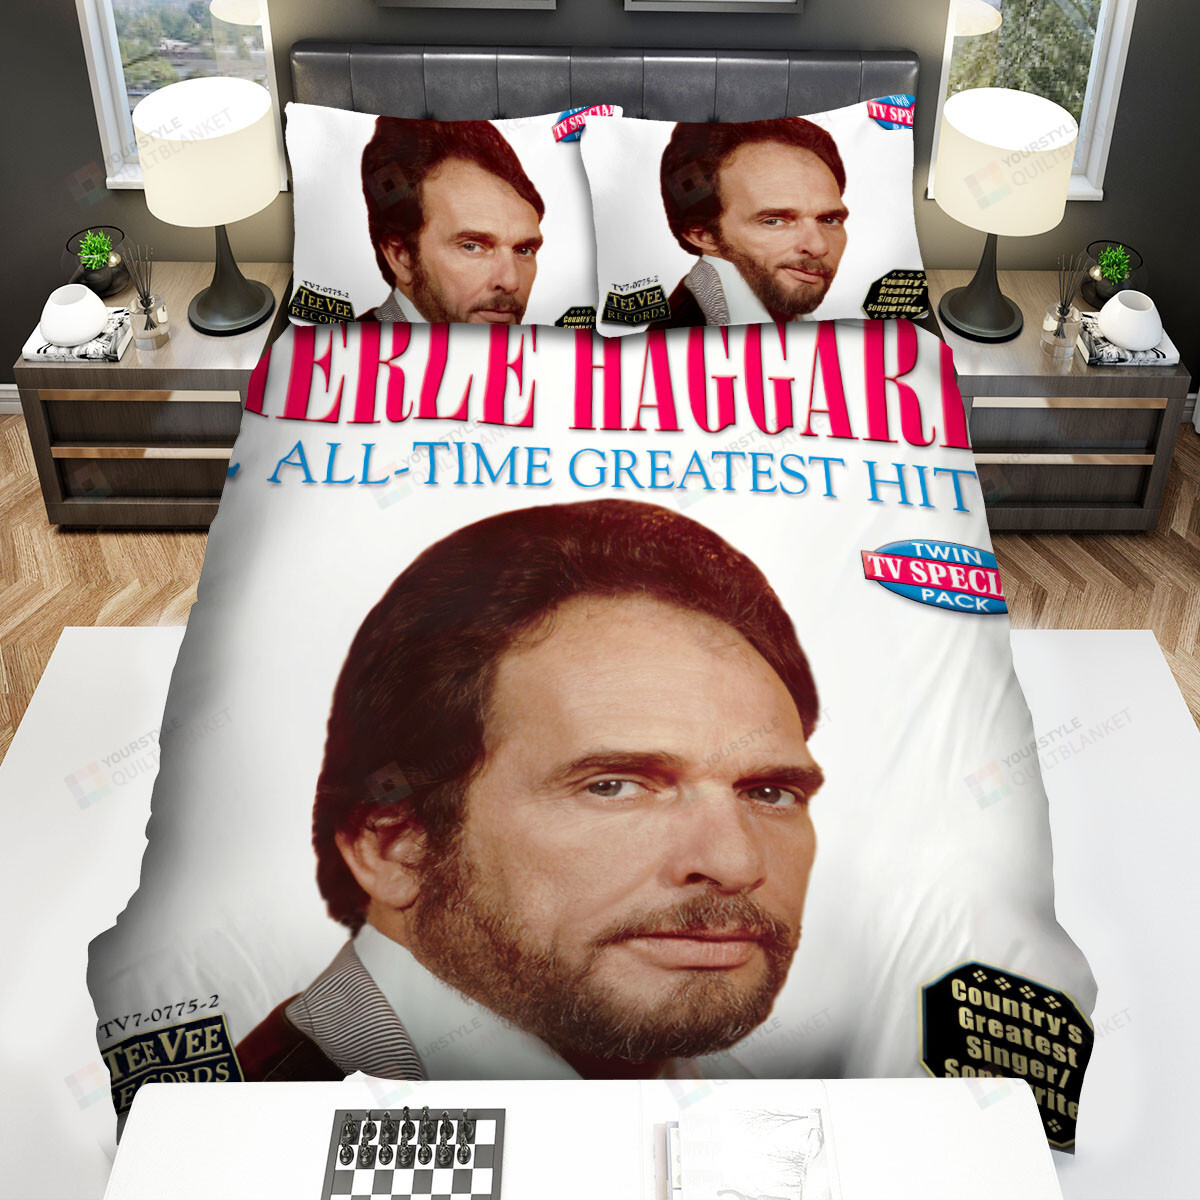 Merle Haggard 22 All Time Greatest Hits Bed Sheets Spread Comforter Duvet Cover Bedding Sets